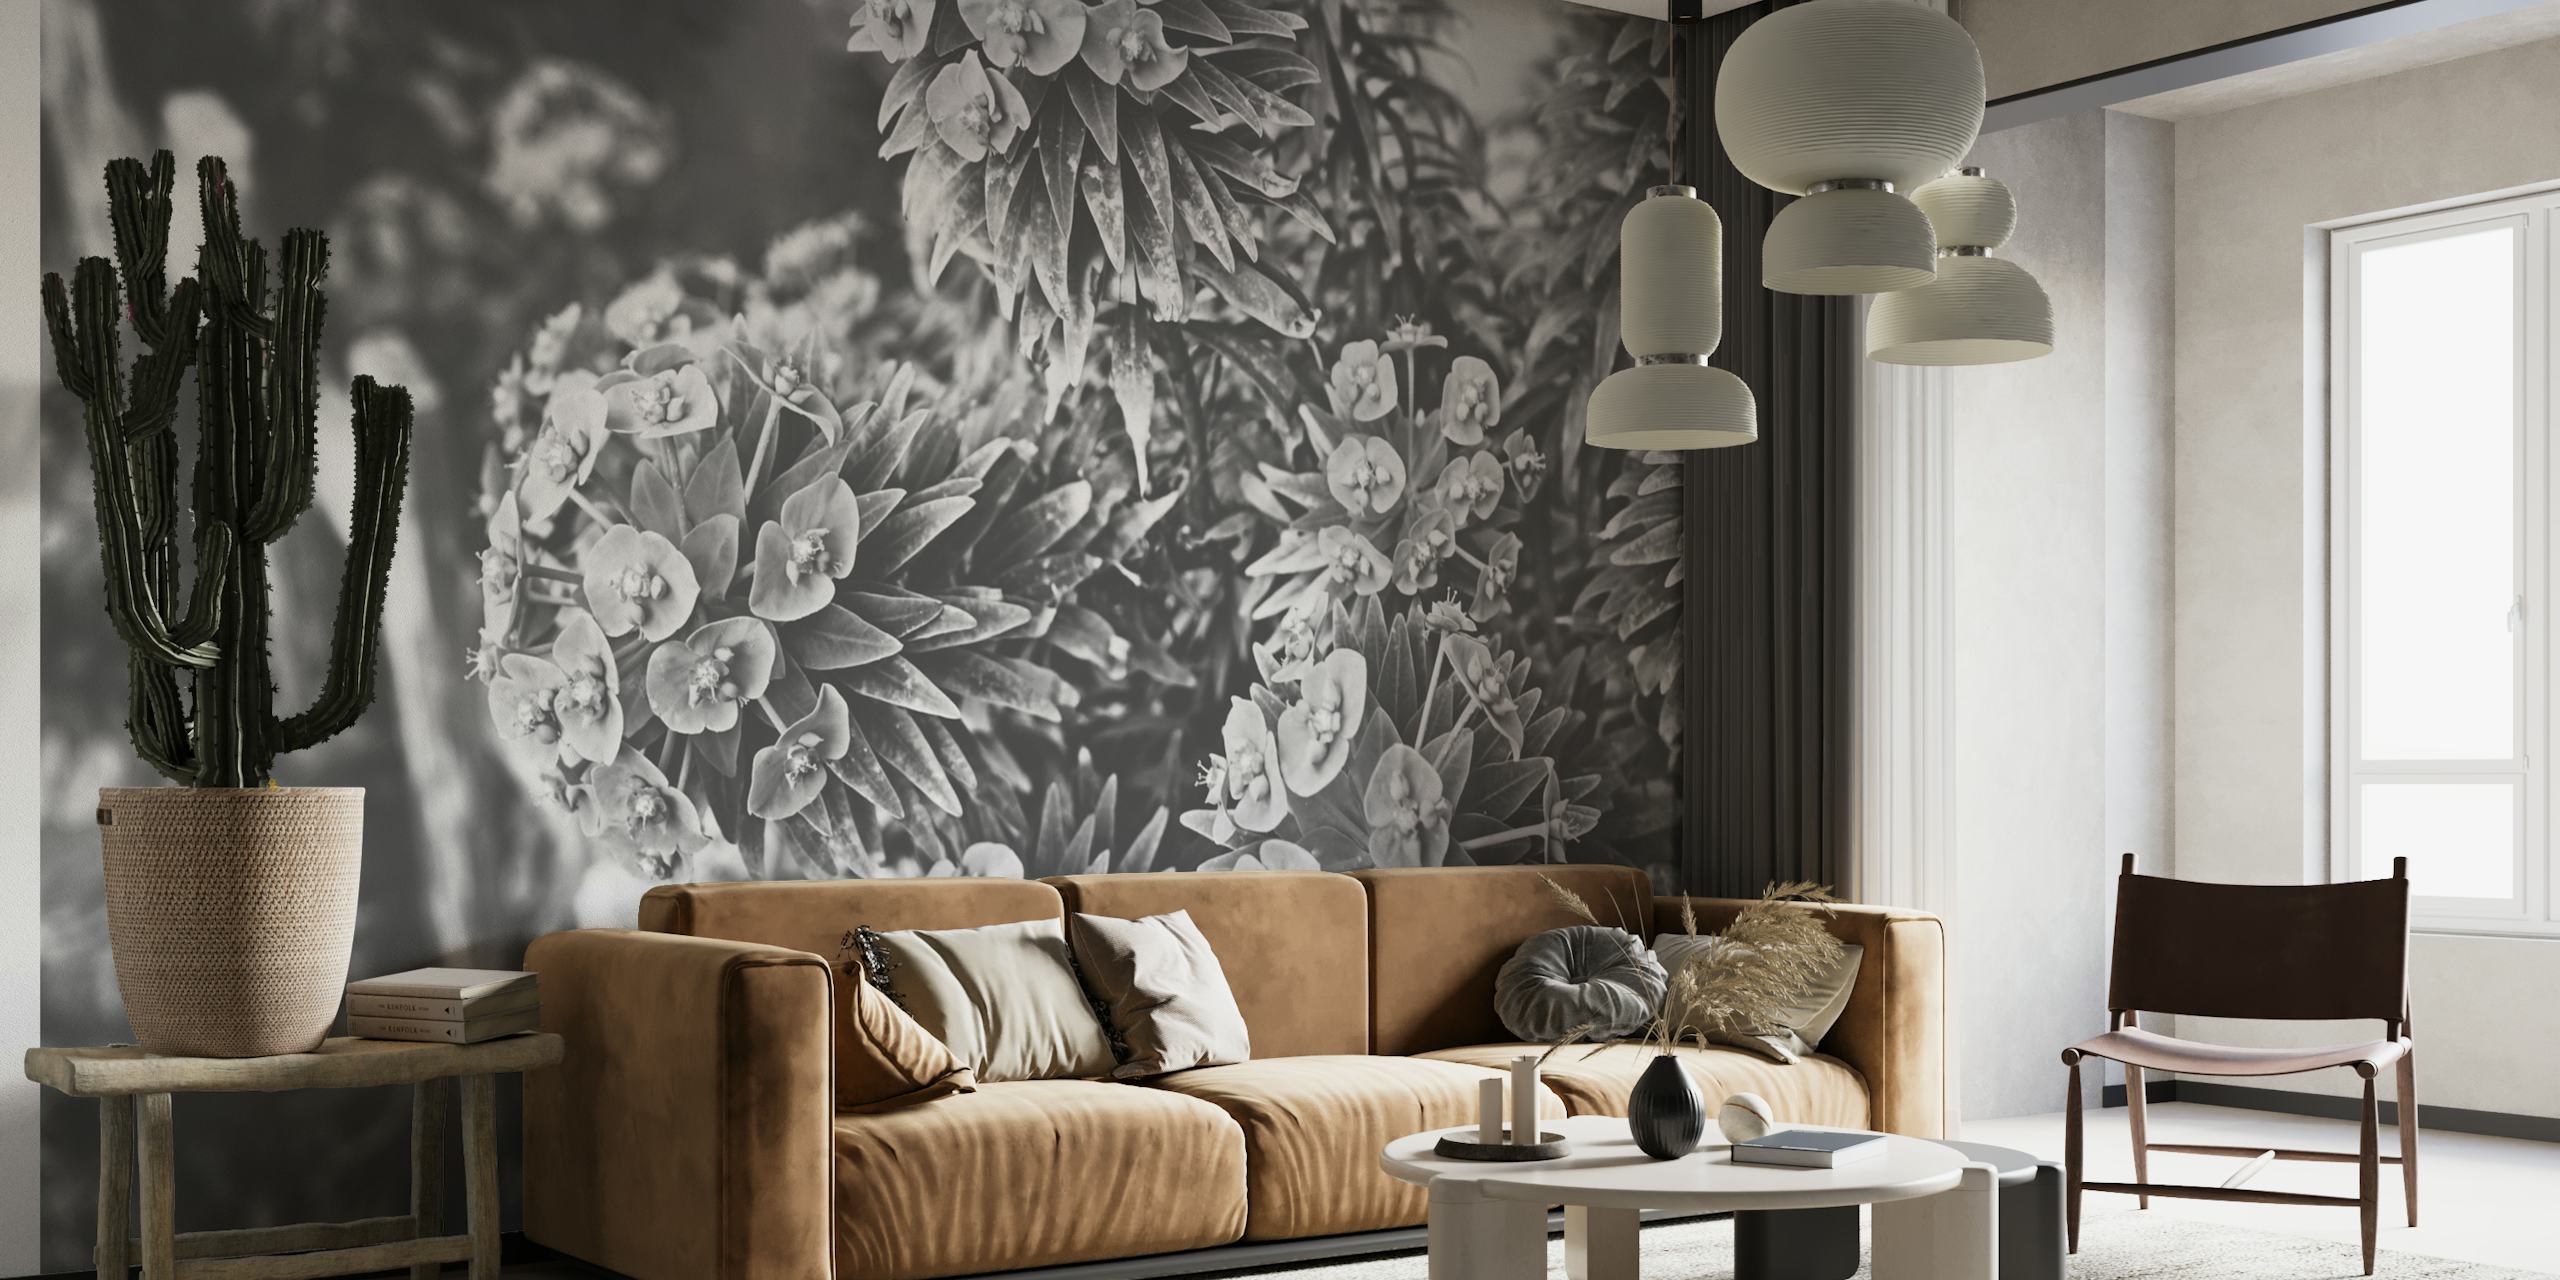 Black and white summer garden wall mural with lush floral patterns